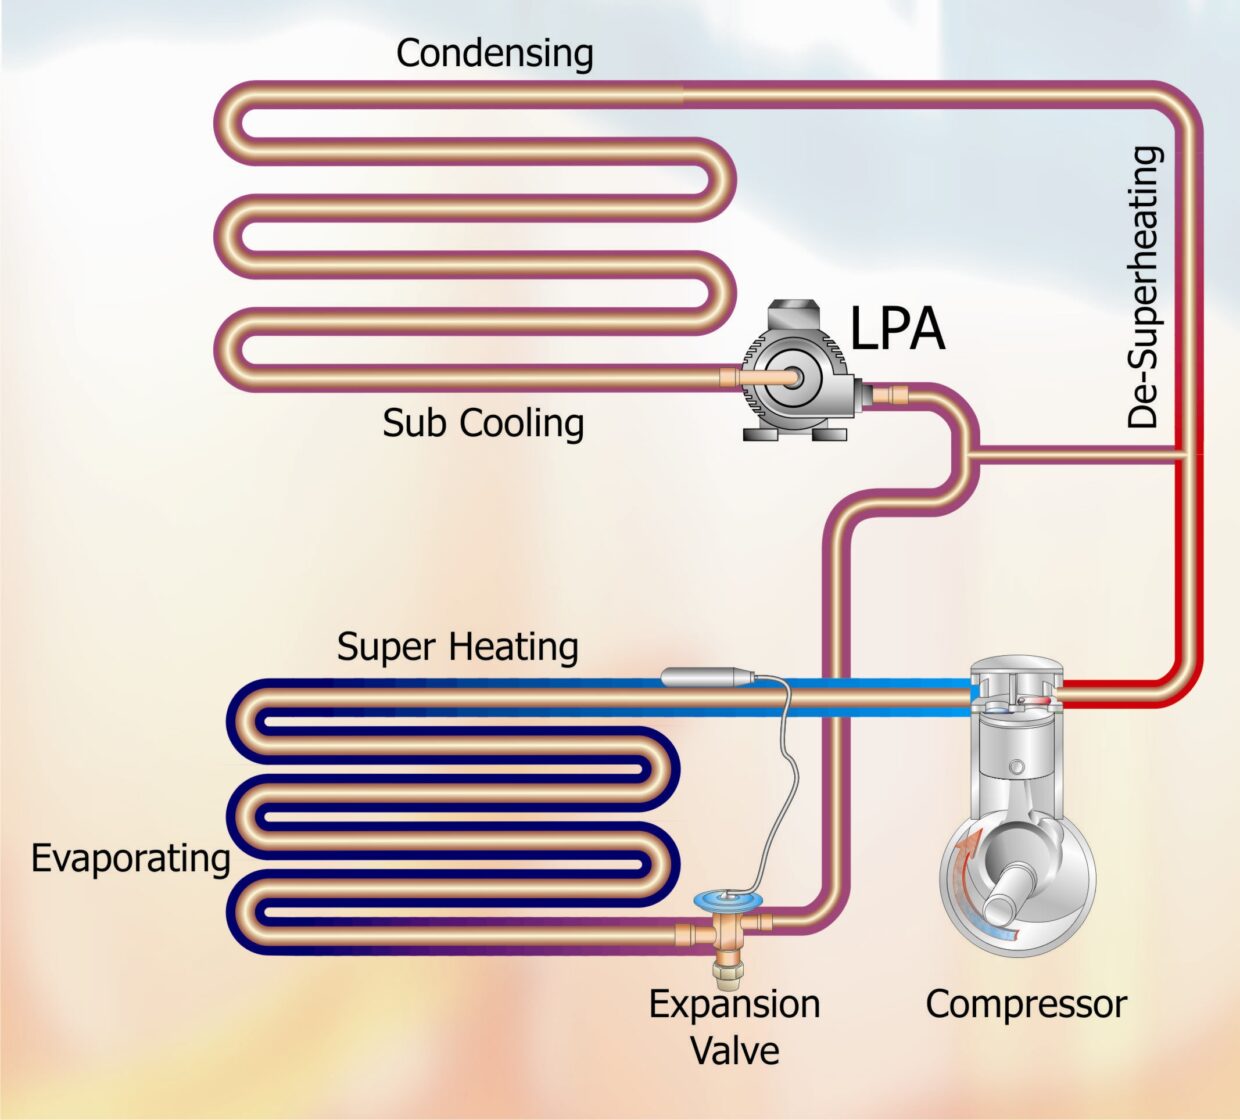 VOL 56 - Direct Expansion Refrigeration Cycle - Fig 3 System with LPA and Superheat suppression